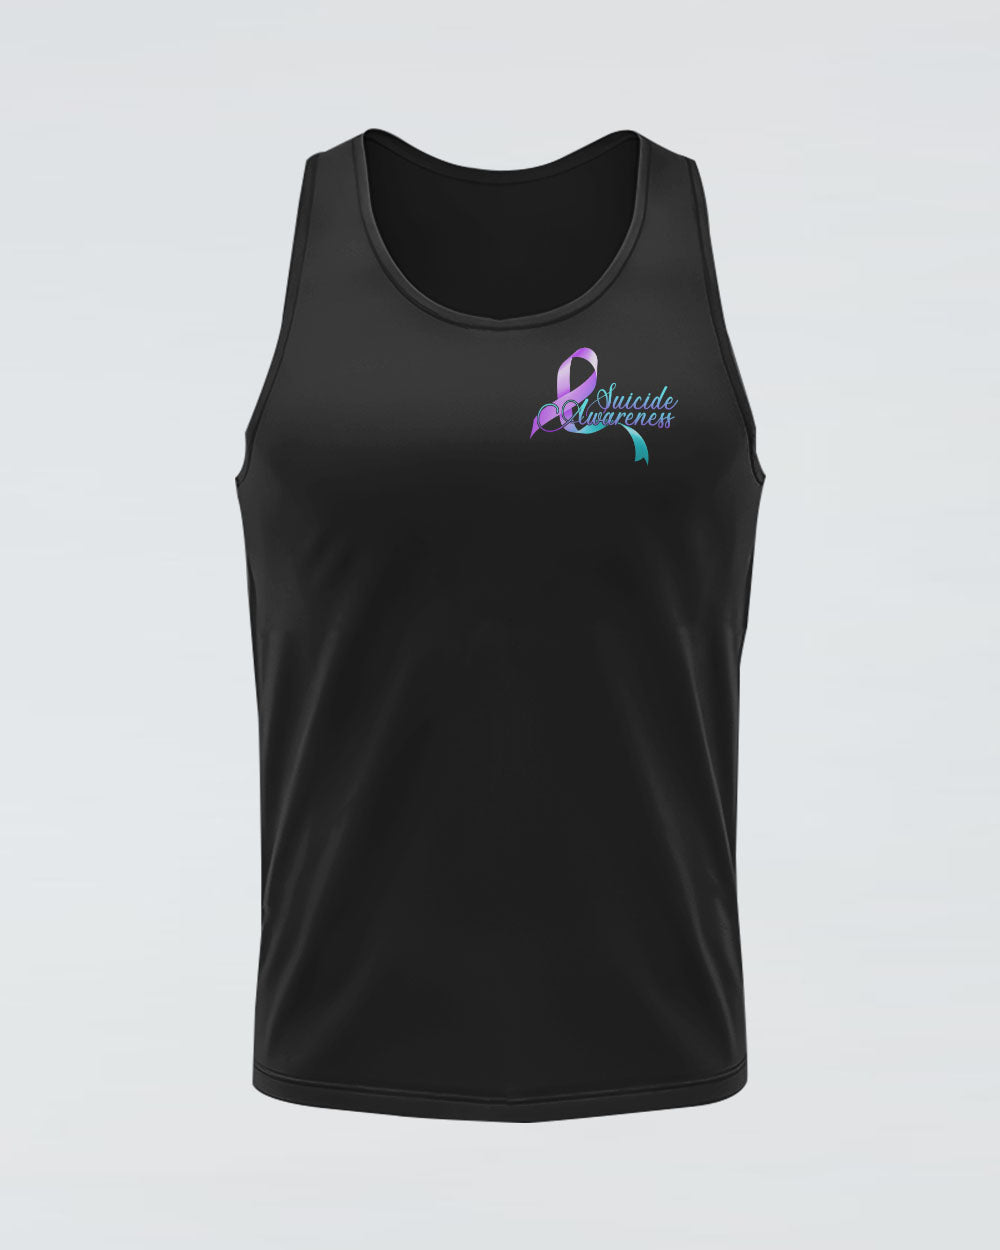 They Whispered To Her You Cannot Withstand The Storm Women's Suicide Prevention Awareness Tanks